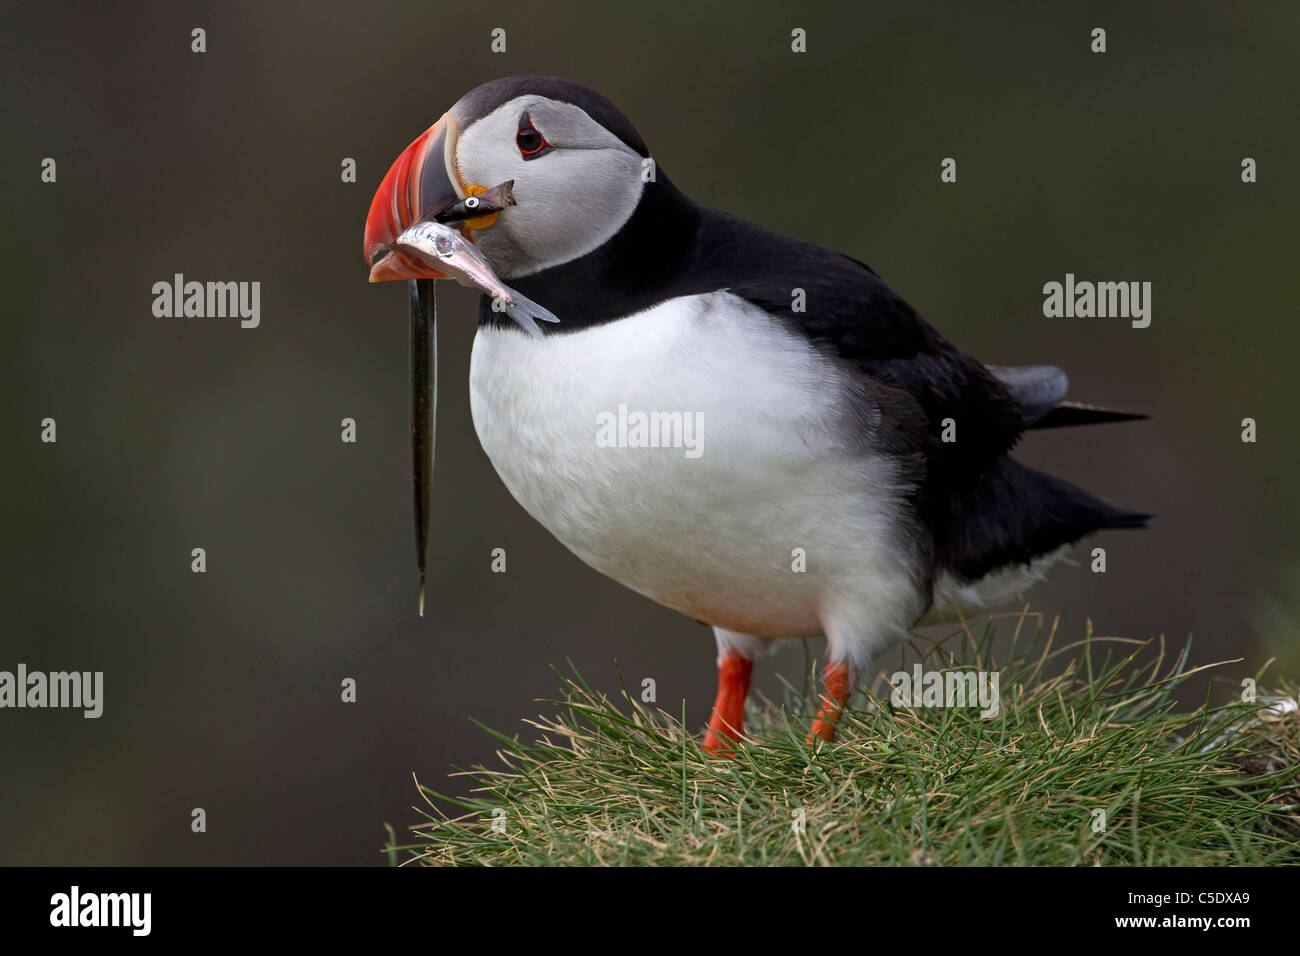 Close-up side shot of a puffin with fish in it's beak against blurred background Stock Photo